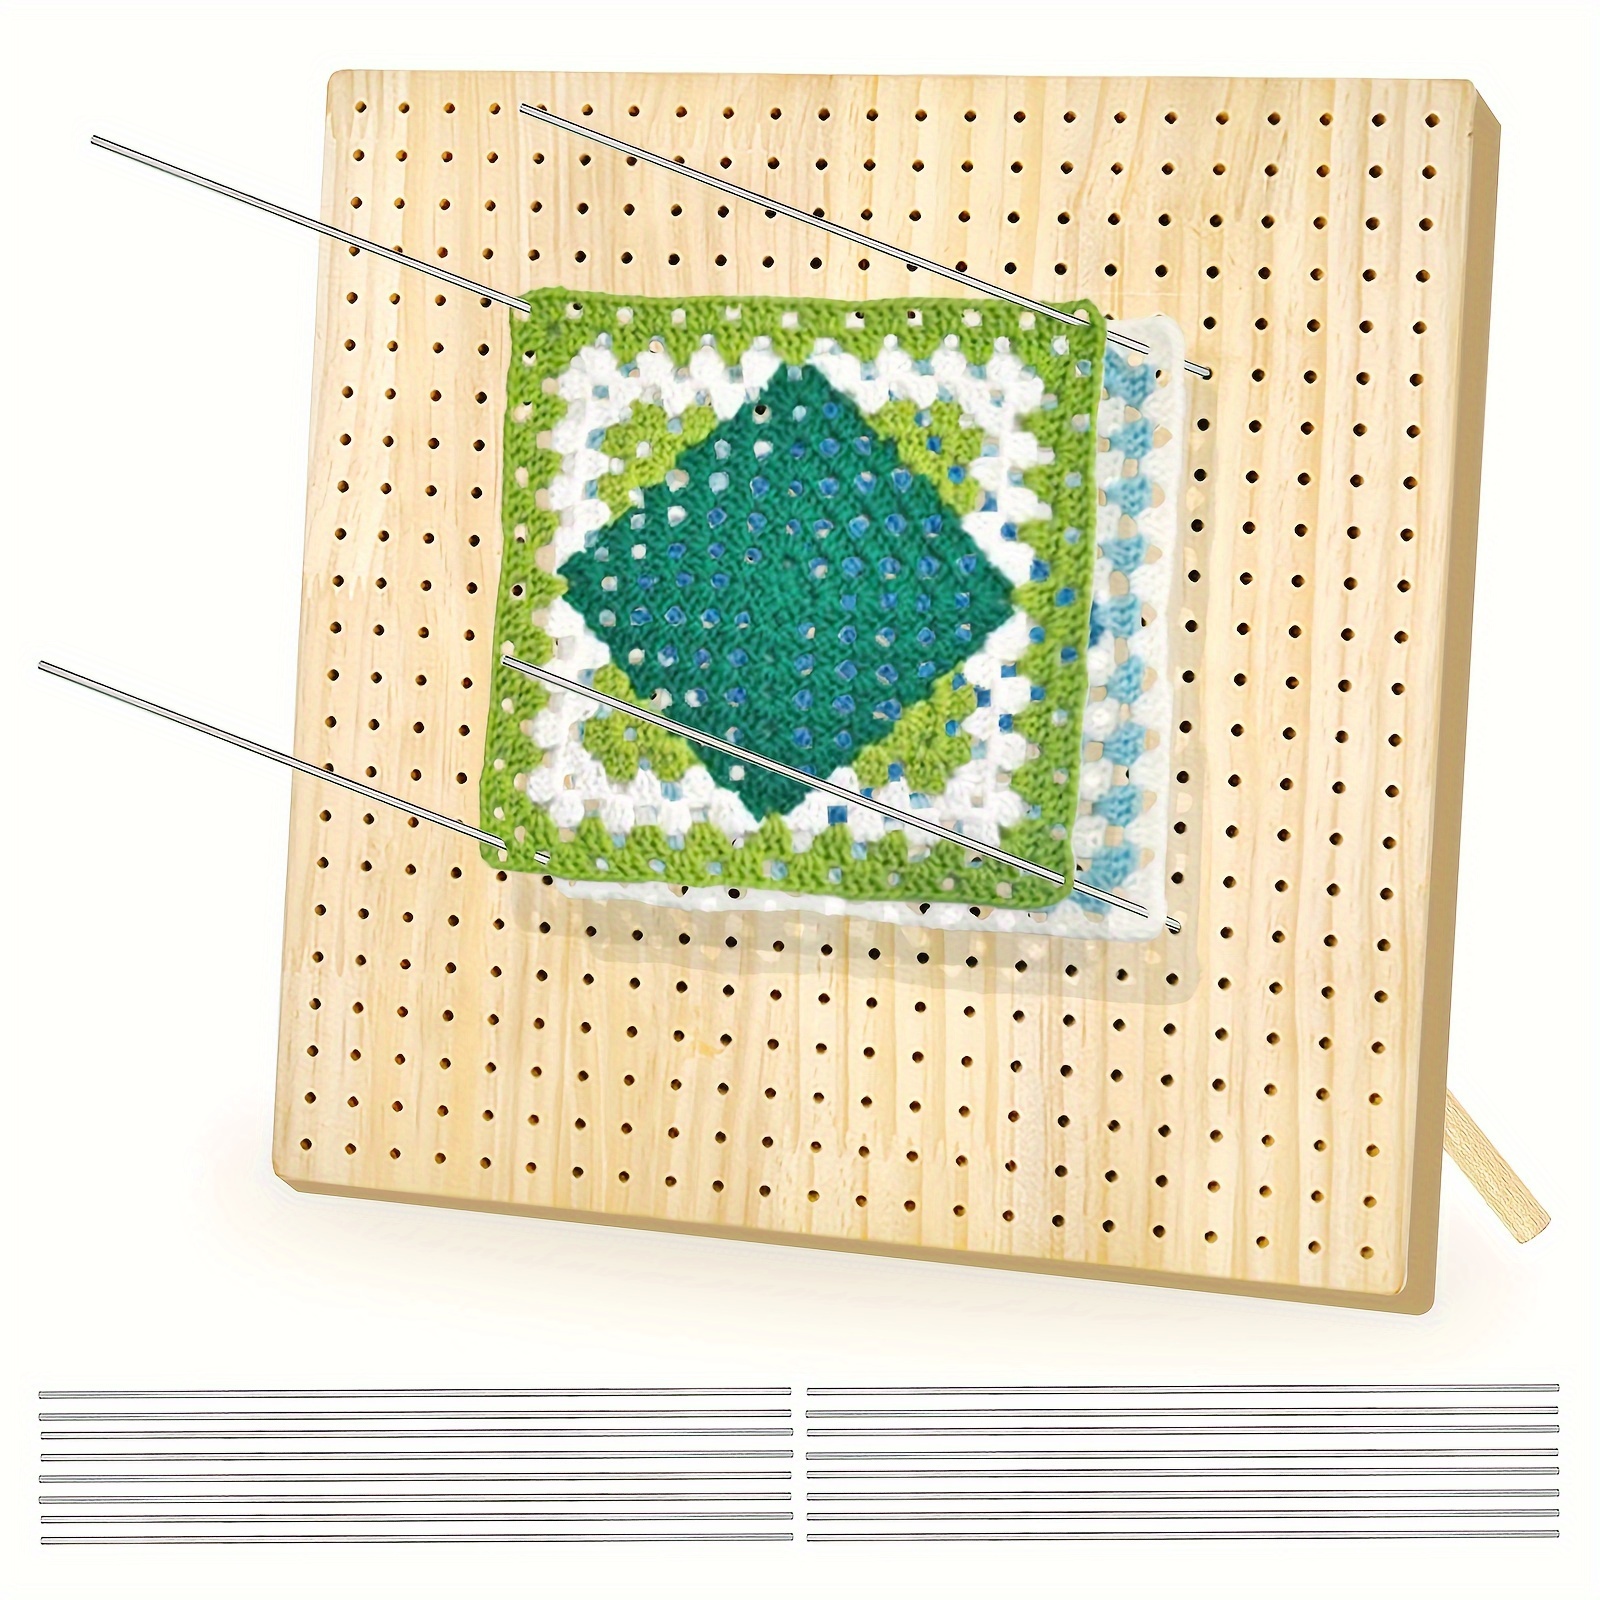 

1set Large Size Premium Rubber Wooden Crochet Blocking Board - Complete Crochet Accessories Set With 20 Steel Pins - Ideal For Knitting, Granny Squares, And Projects 12 Inch